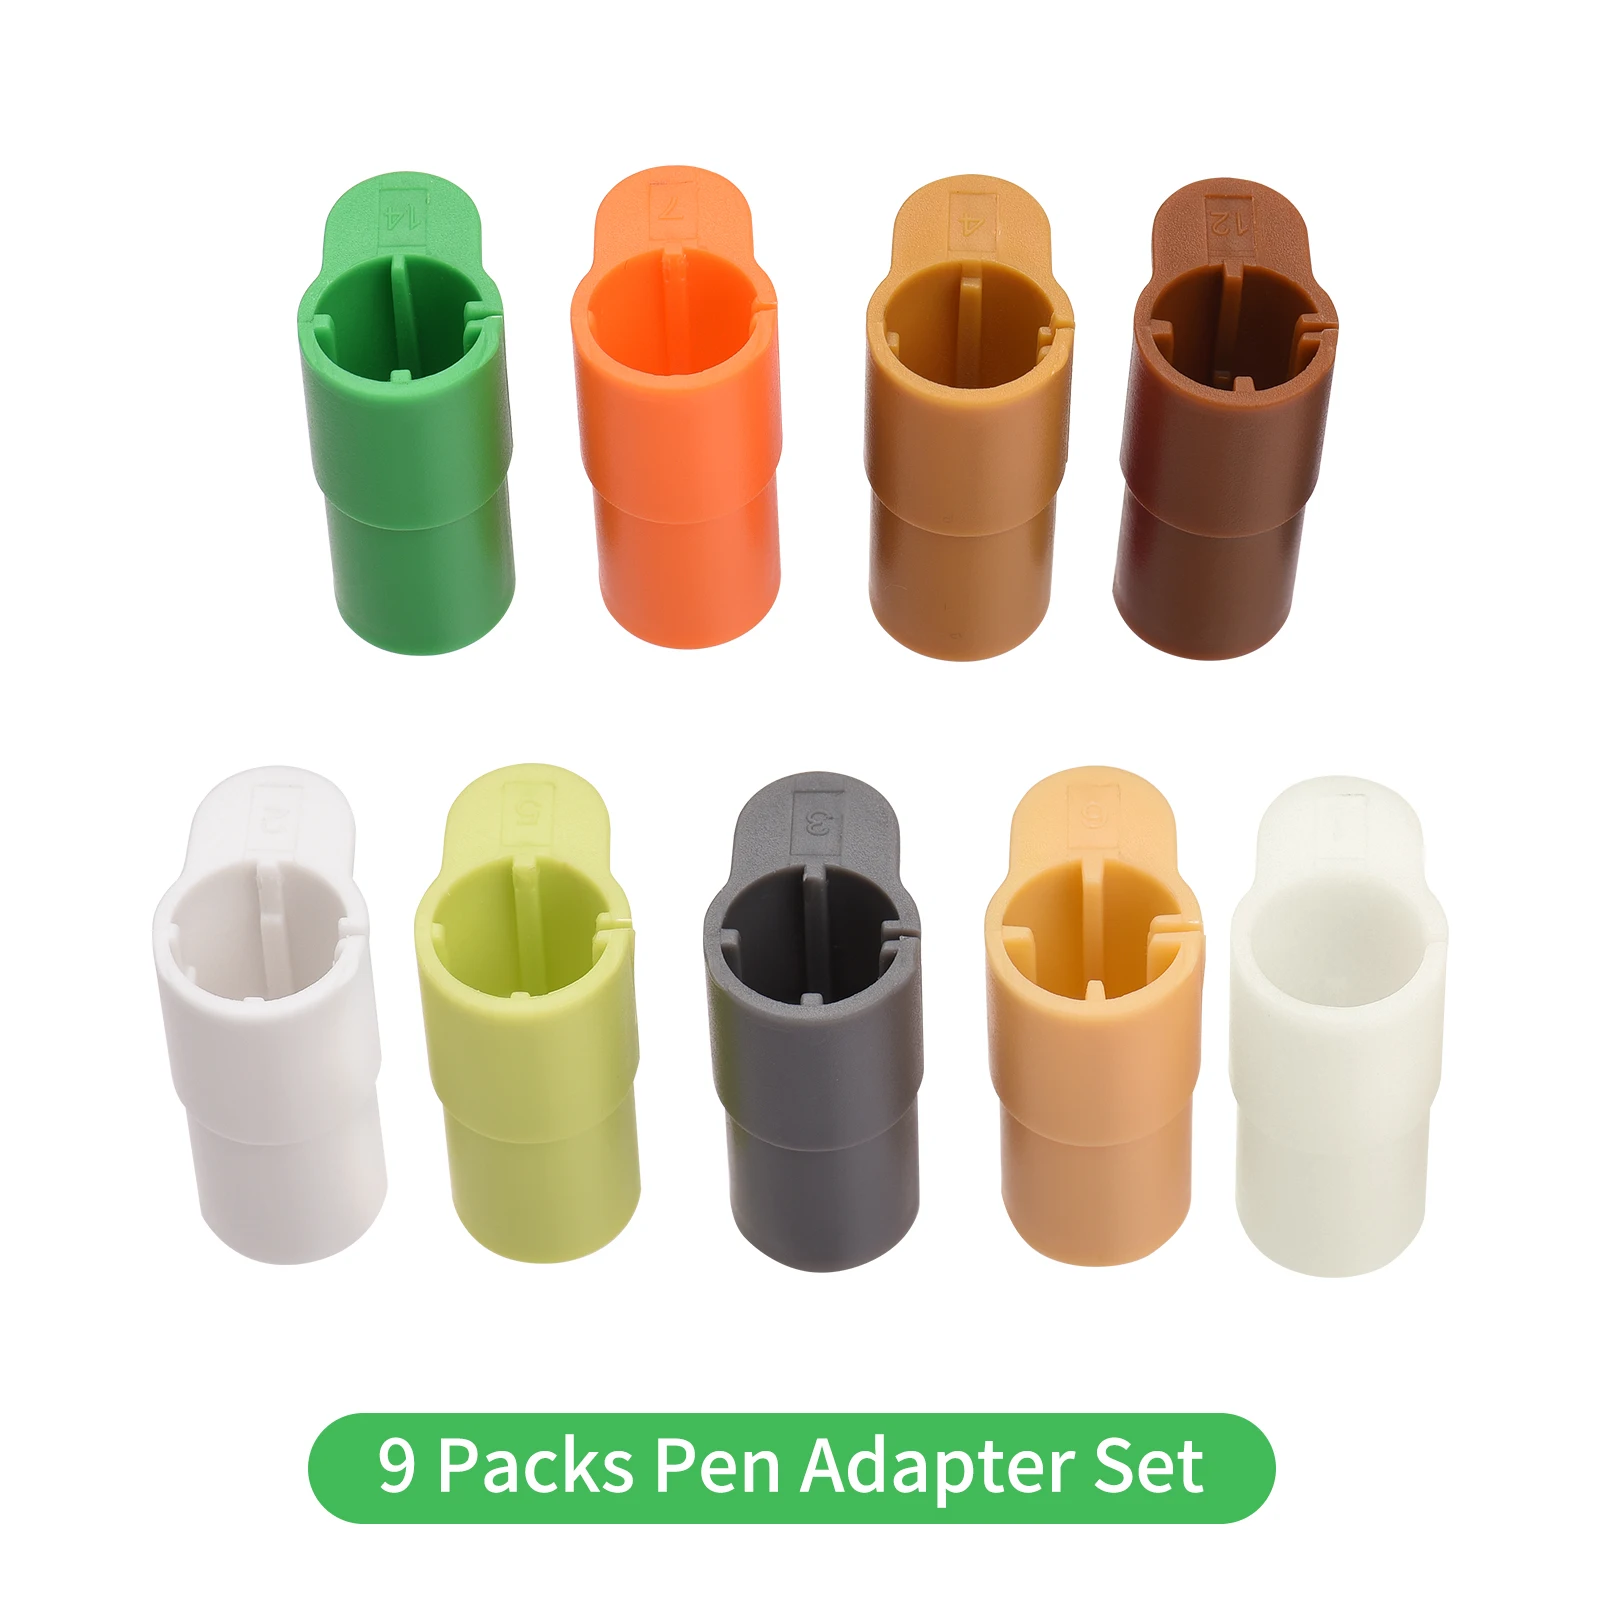 Packs Pen Adapter Set Marker Holder Replacement For Sharpie/bic/crayola  Compatible With Cricut Explore Air 3/air 2/air/maker/maker 3